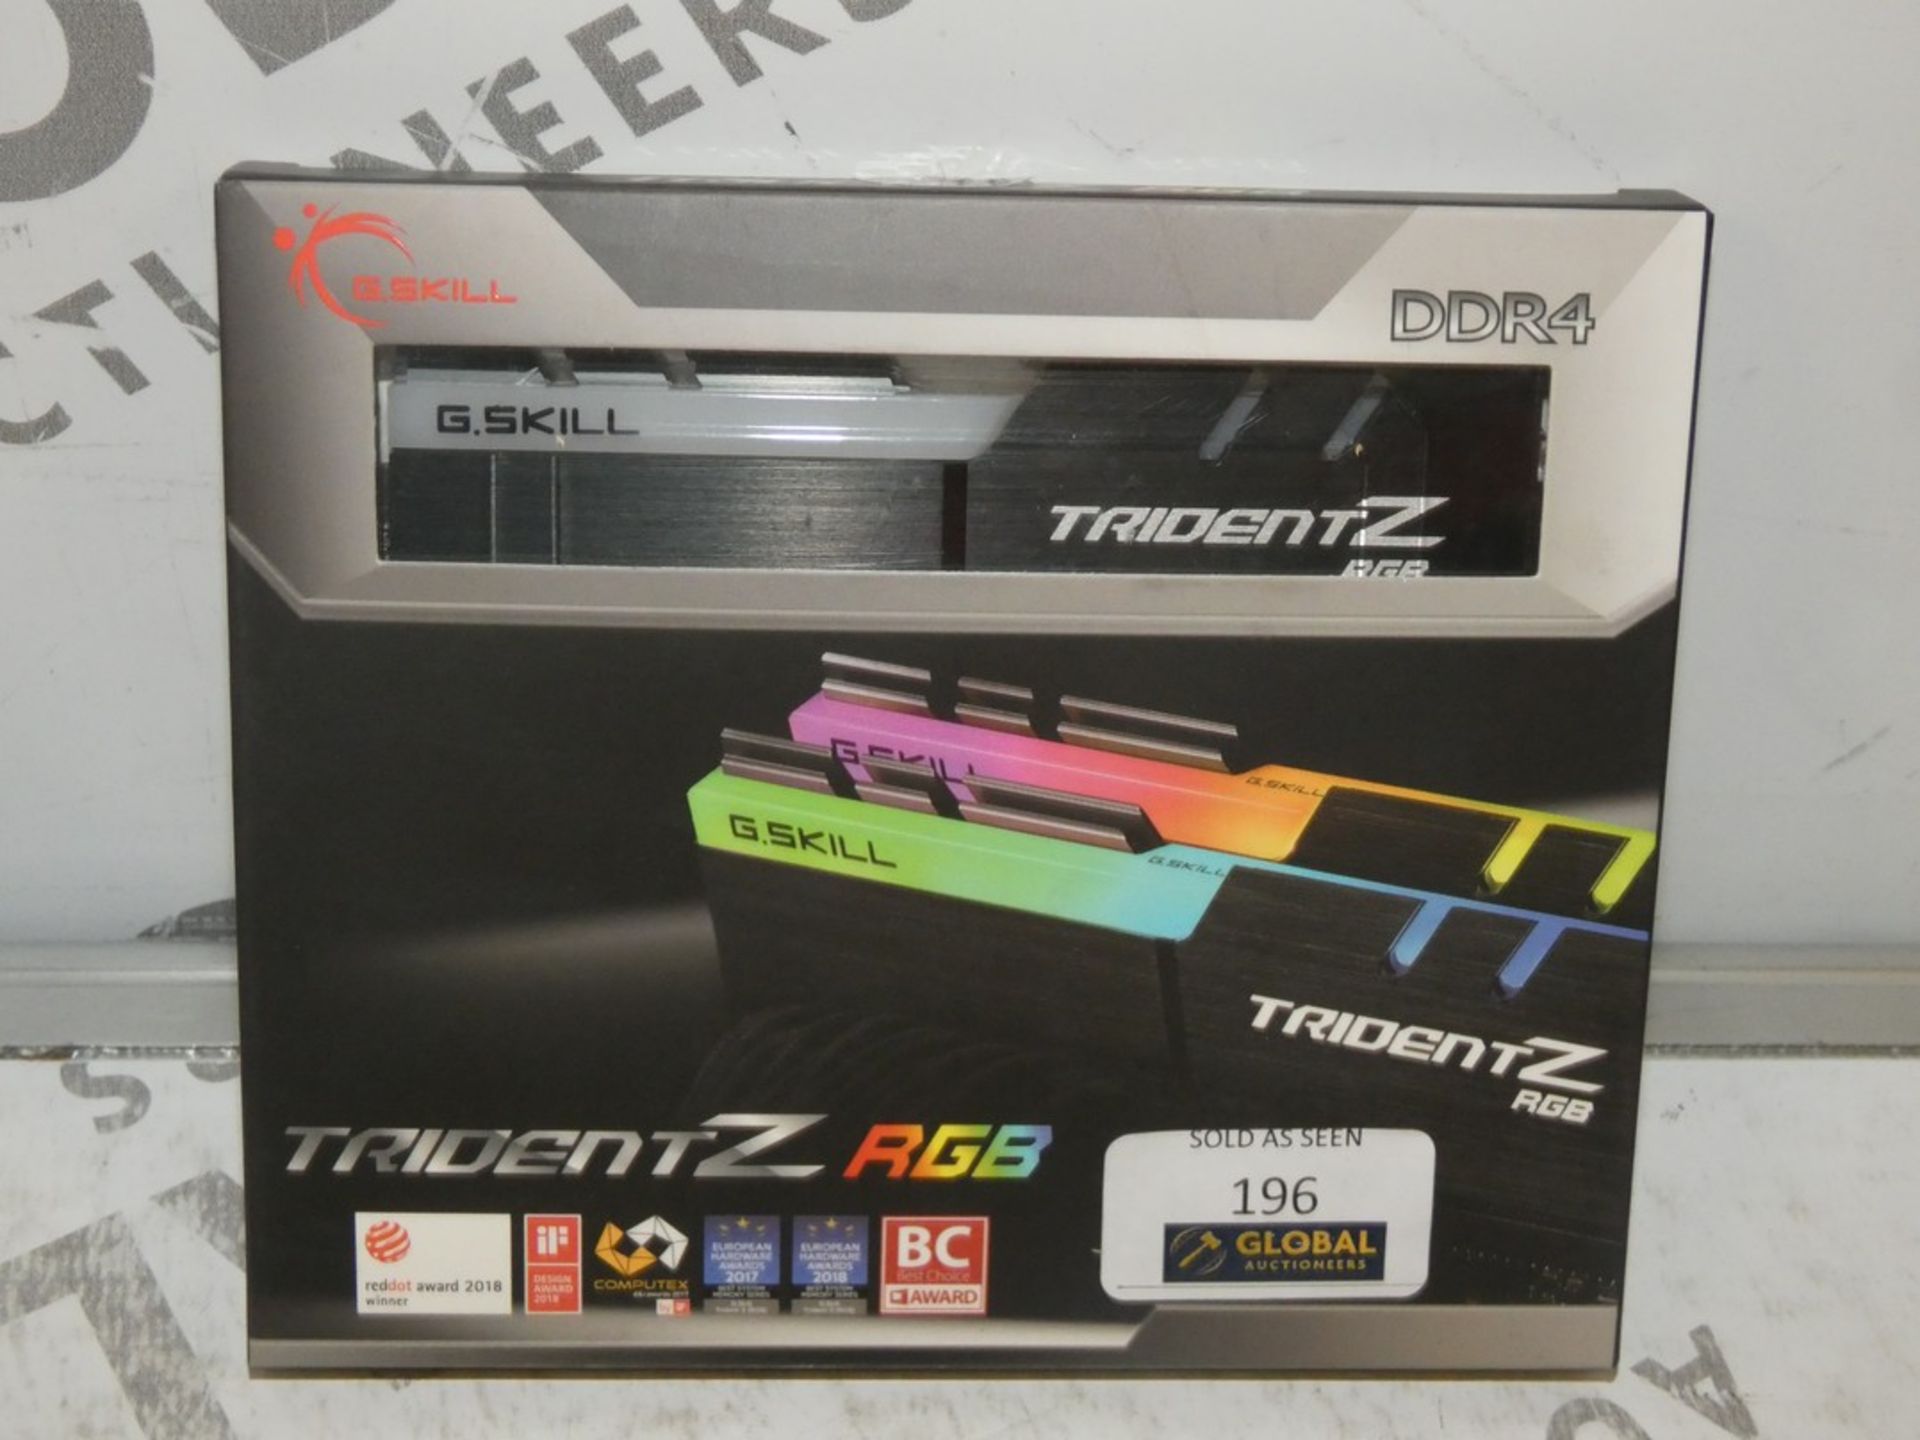 Boxed Tridance R Skills DDR4 Truly Brilliant Extreme Performance LED Lighting Set RRP £164